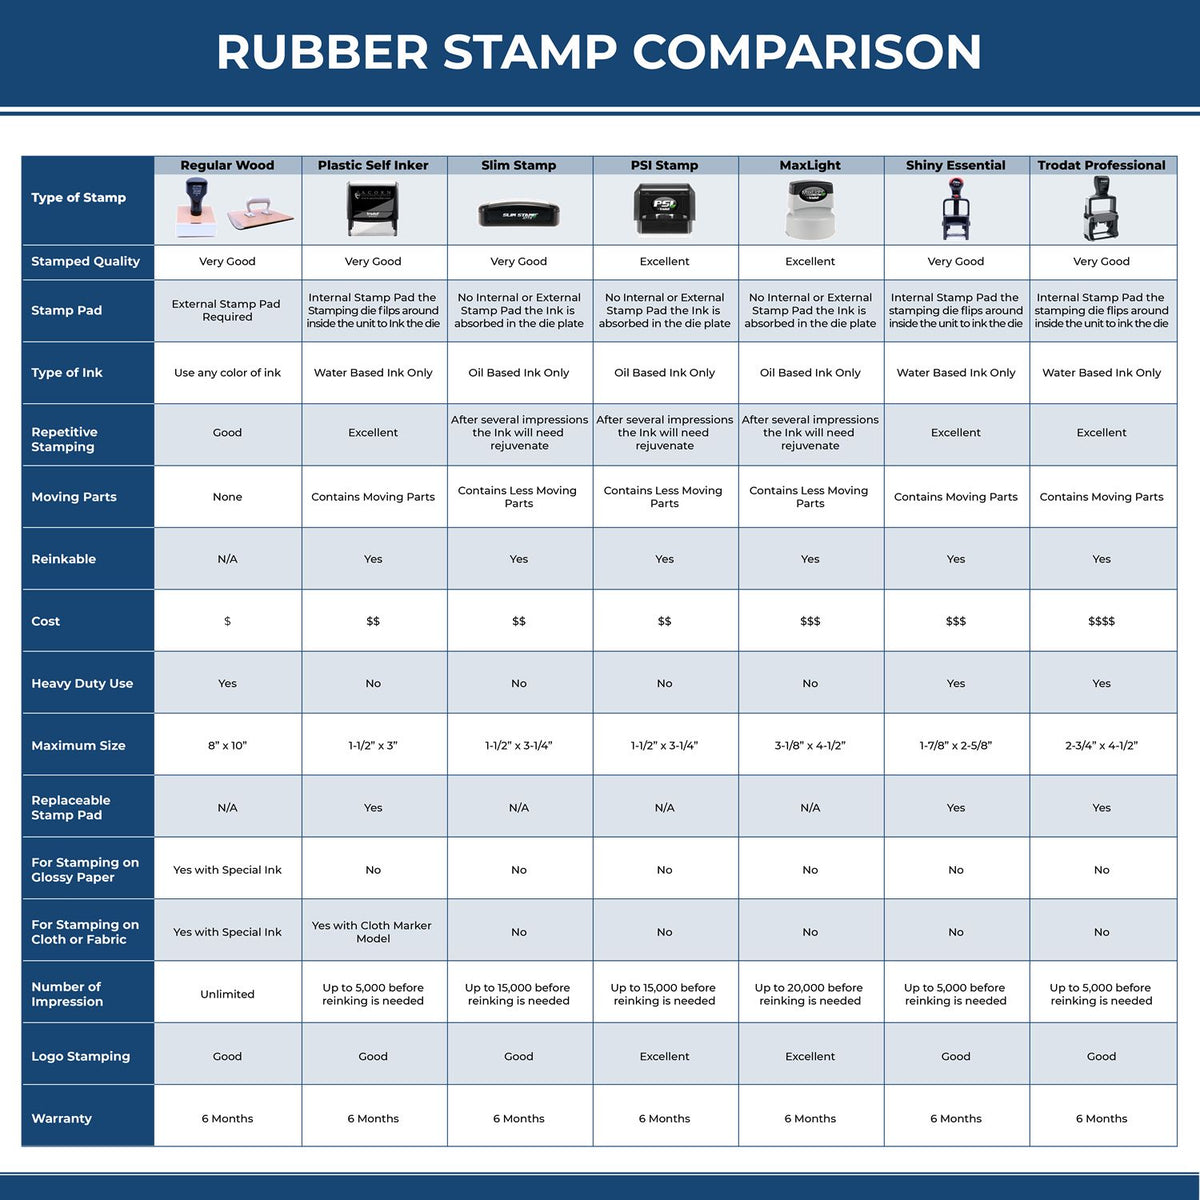 Self-Inking E-mailed with Date Box Stamp 4061S Rubber Stamp Comparison